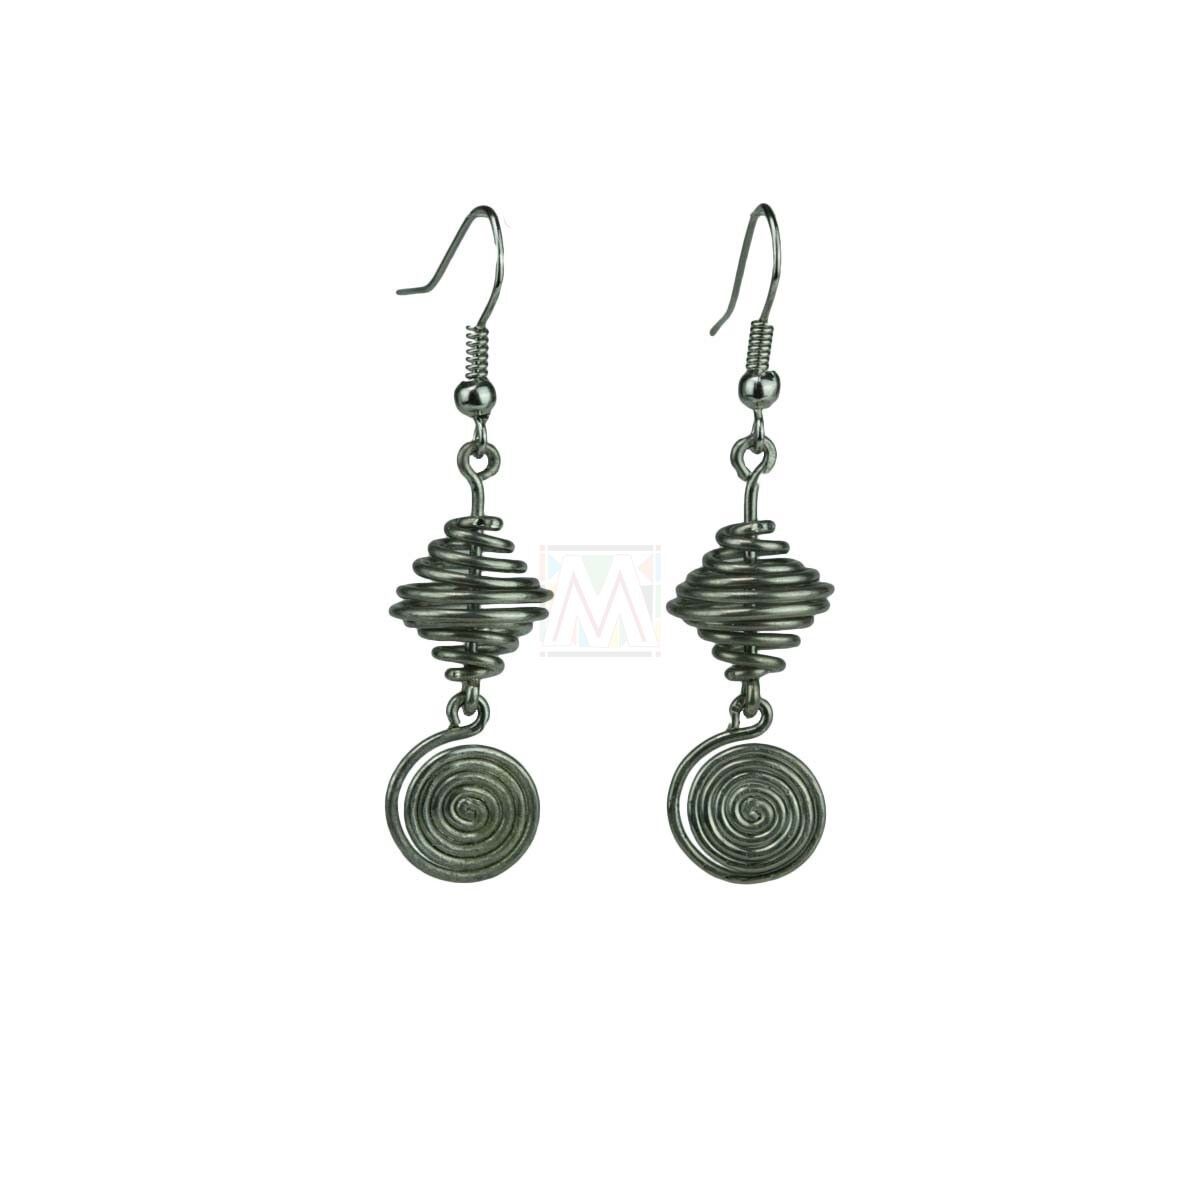 Maasai Market Handmade Silver Plated Wire Spiral and Vortex Earrings MM-576-59